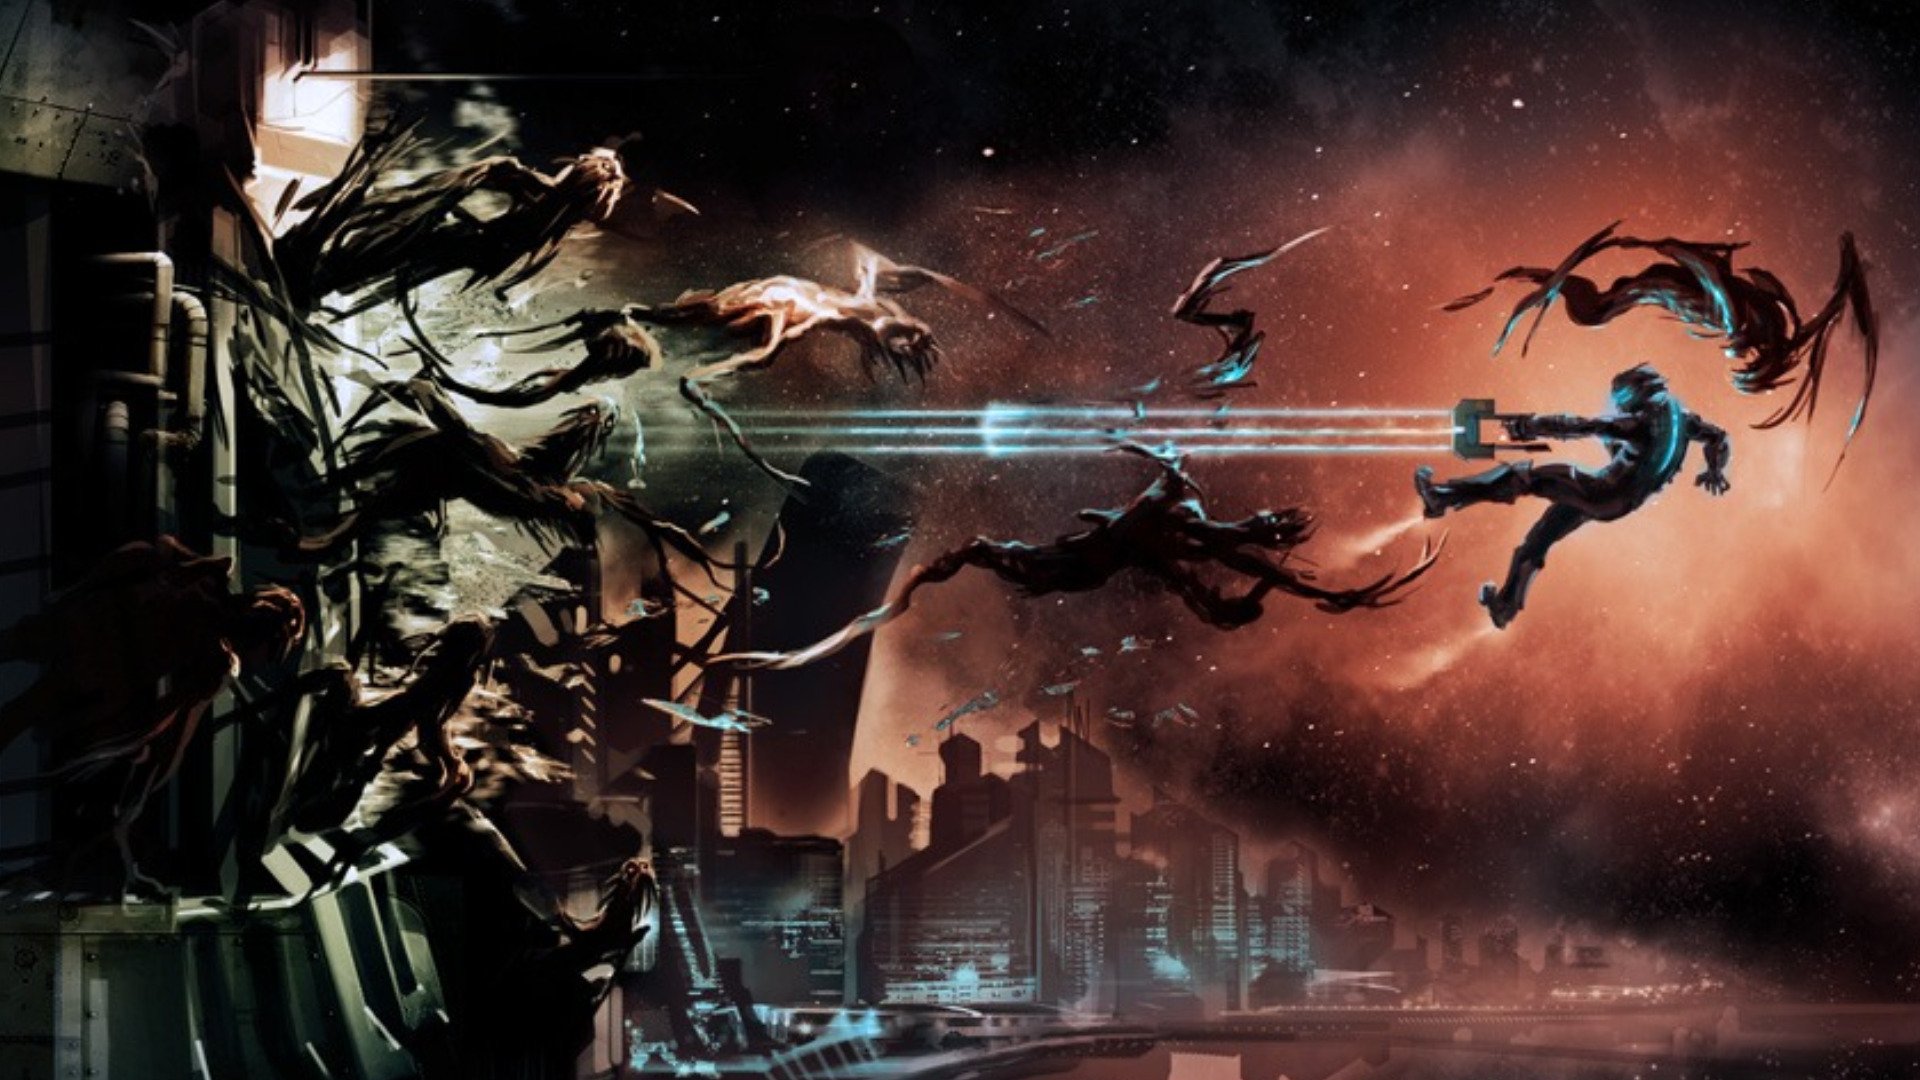 dead space wallpaper hd,action adventure game,cg artwork,digital compositing,shooter game,pc game